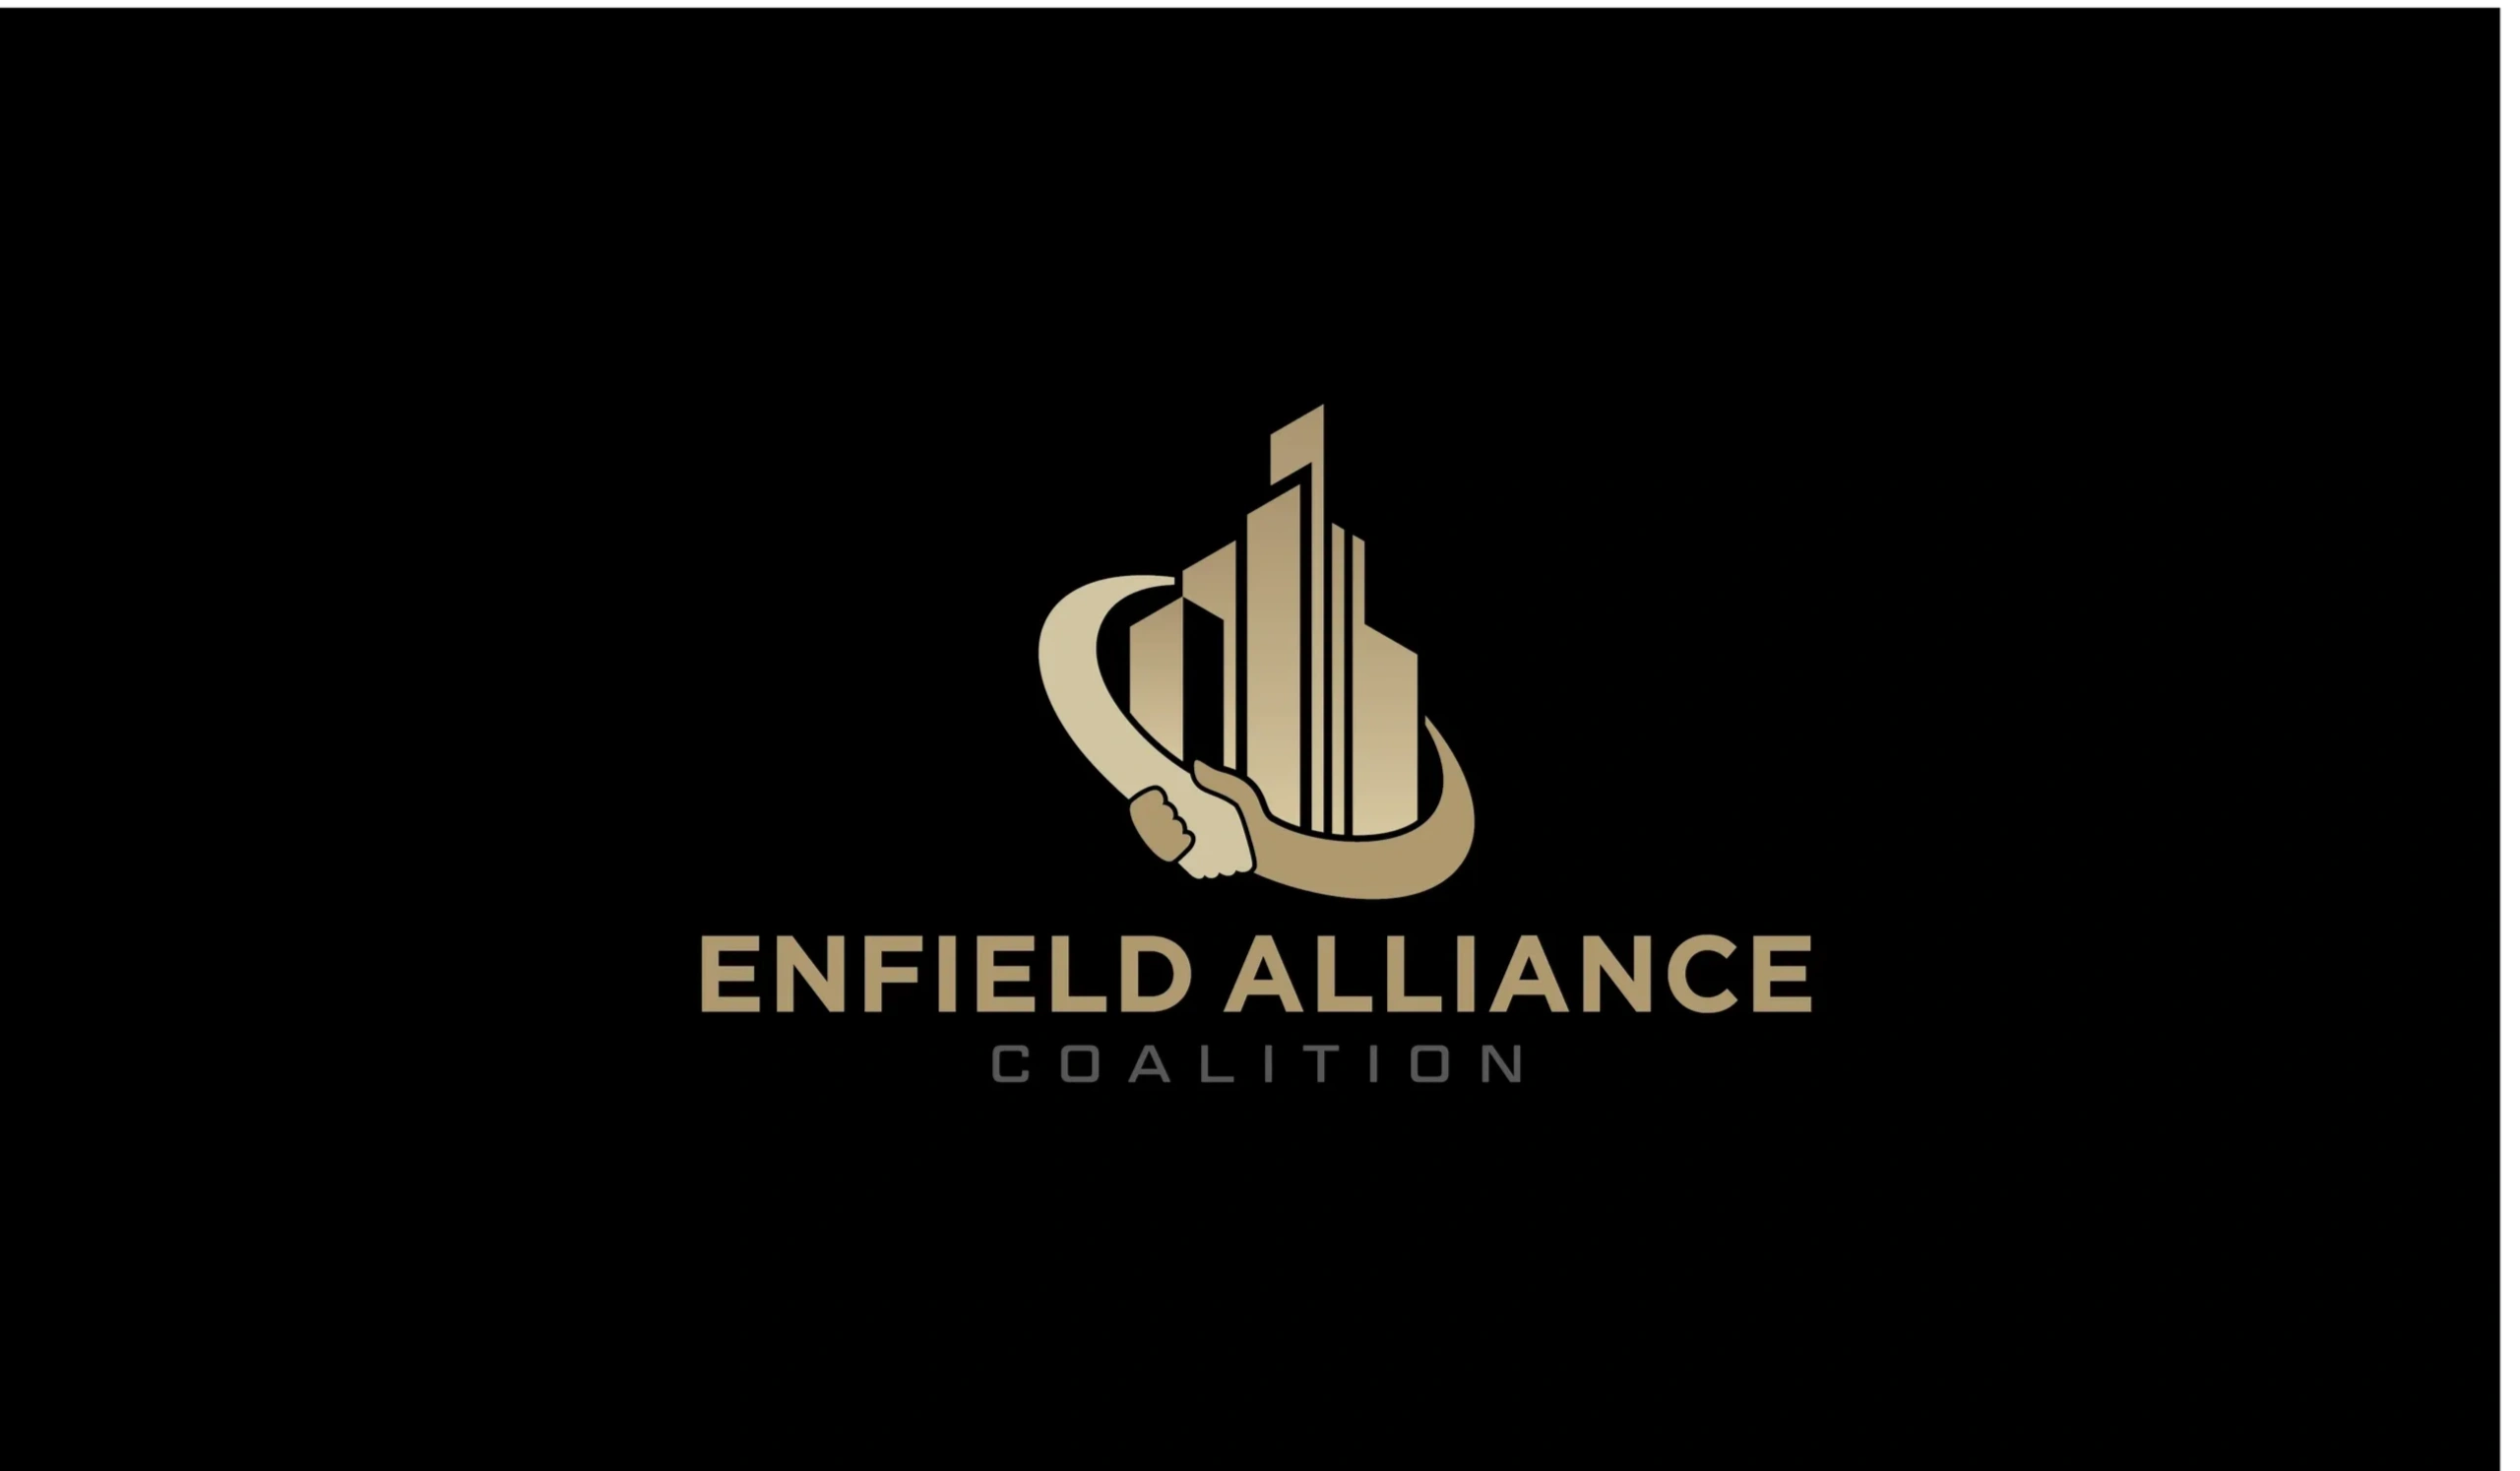 Enfield Alliance Coalition black and gold logo